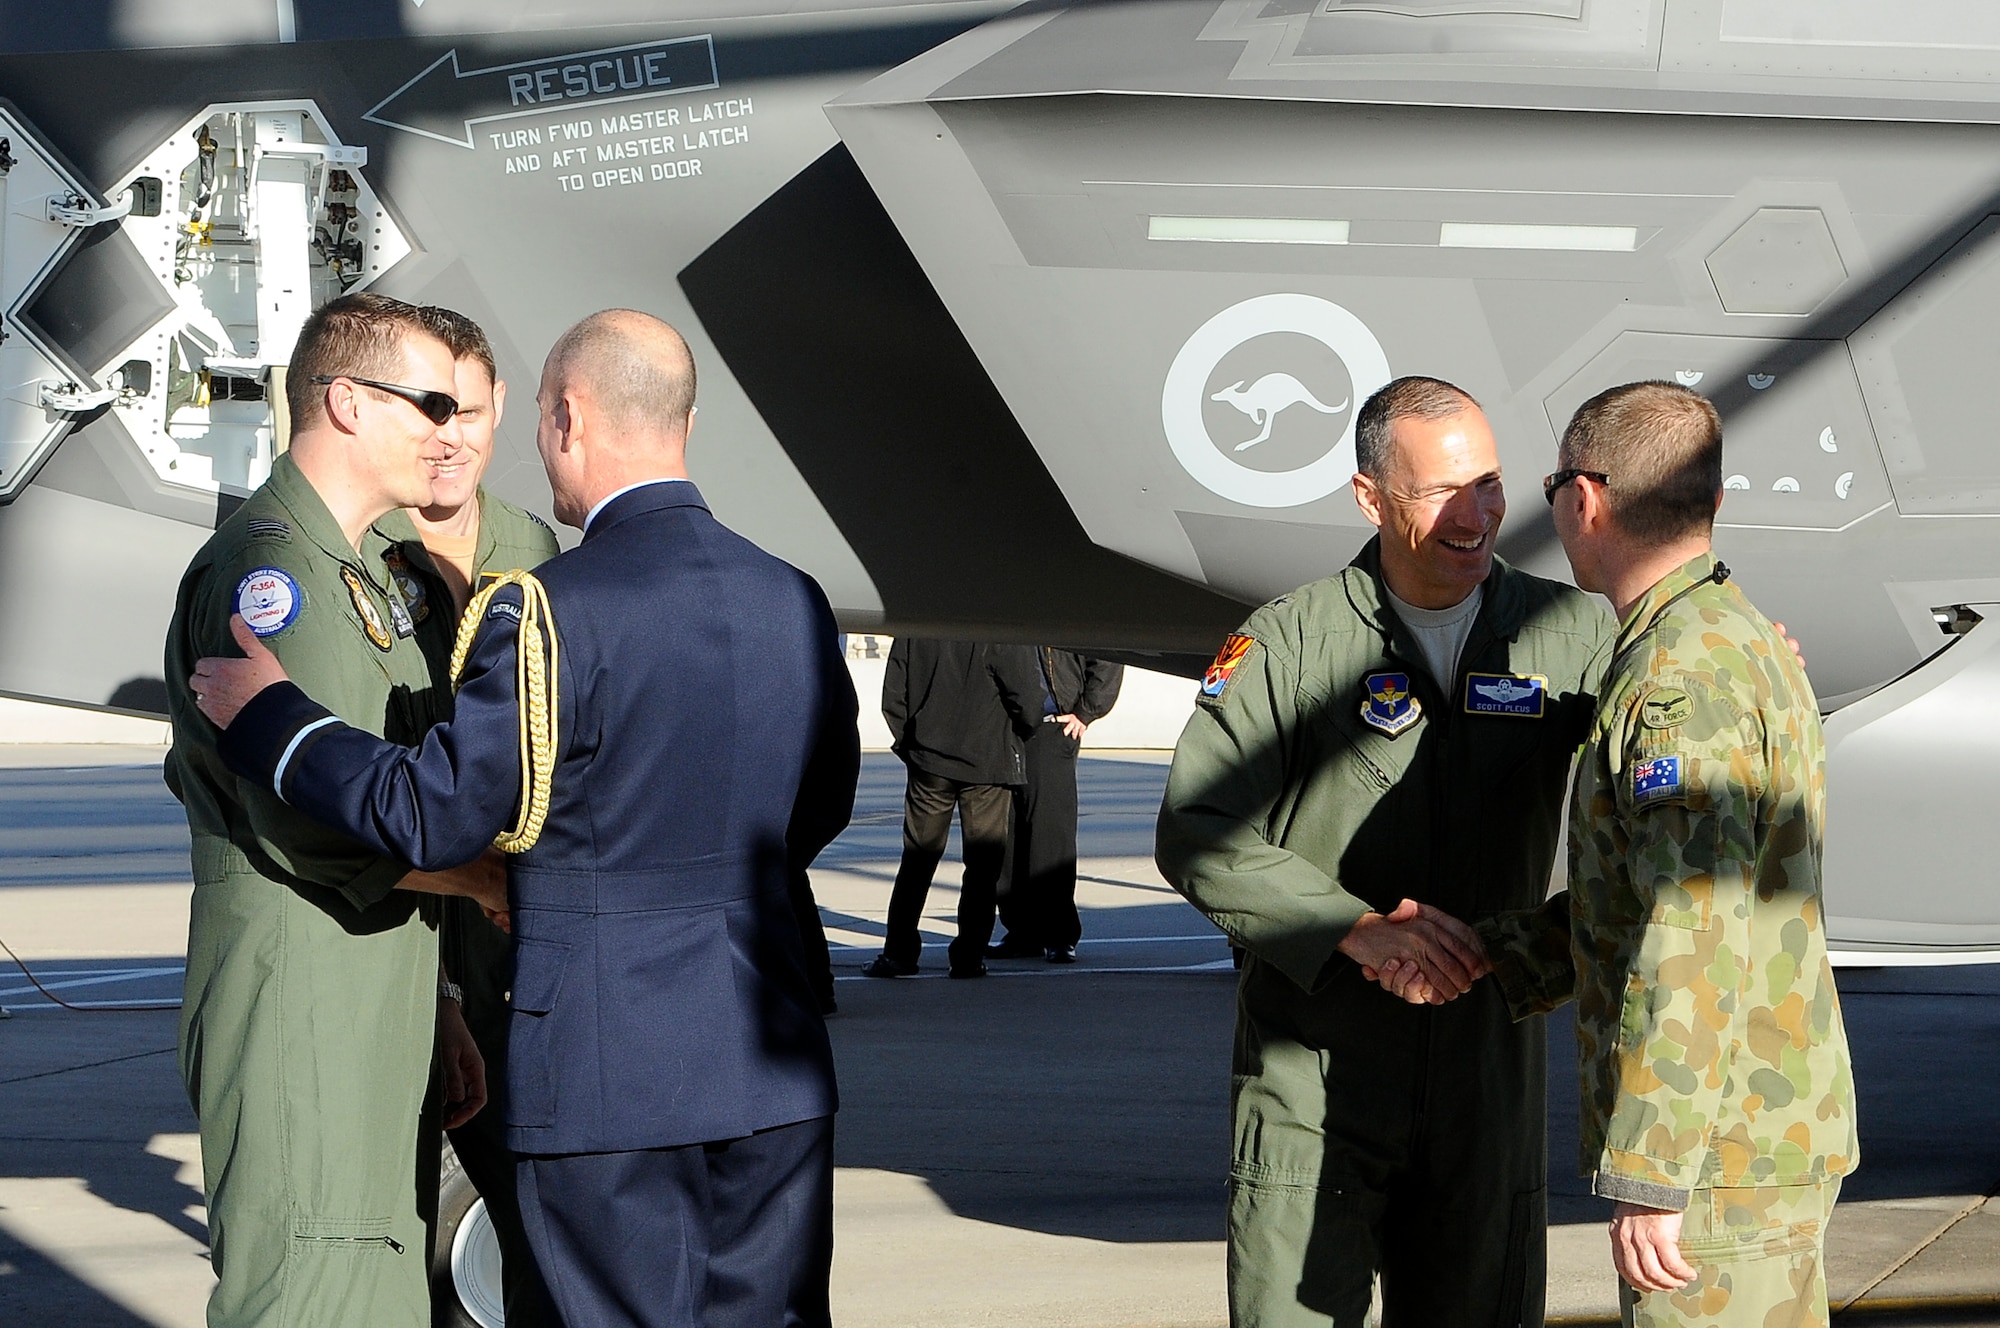 The first Royal Australian Air Force F-35A Lightning II jet arrived at Luke
Air Force Base Dec. 18, 2014. The jet's arrival marks the first
international partner F-35 to arrive for training at Luke. (U.S. Air Force photo by Airman Pedro Mota) 
